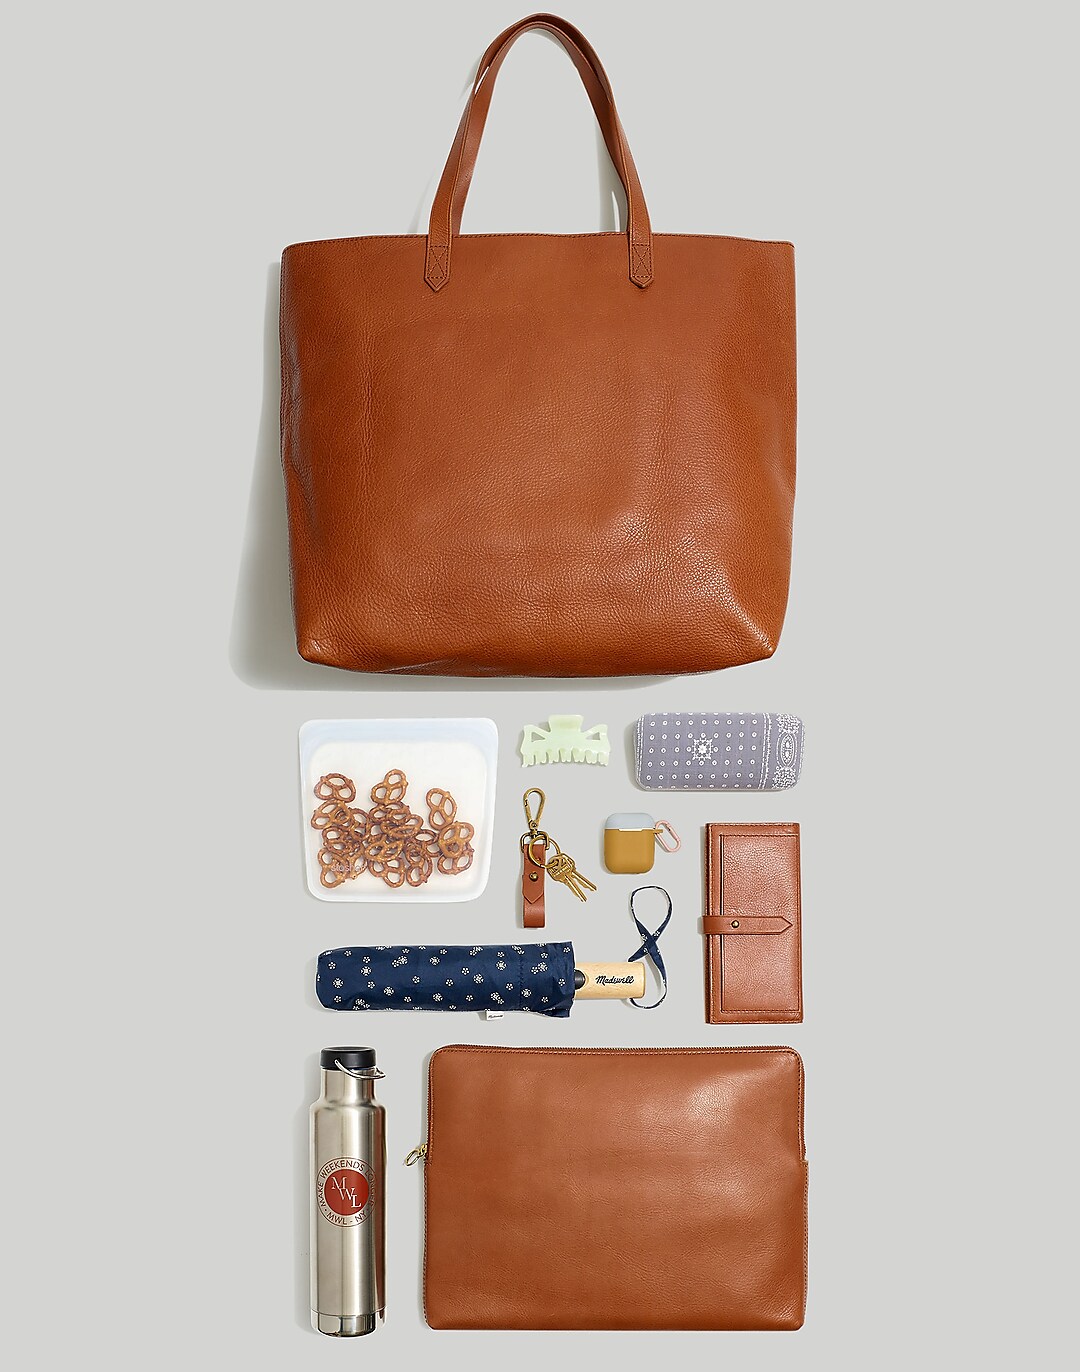 Madewell Transport Tote Review, Something Good